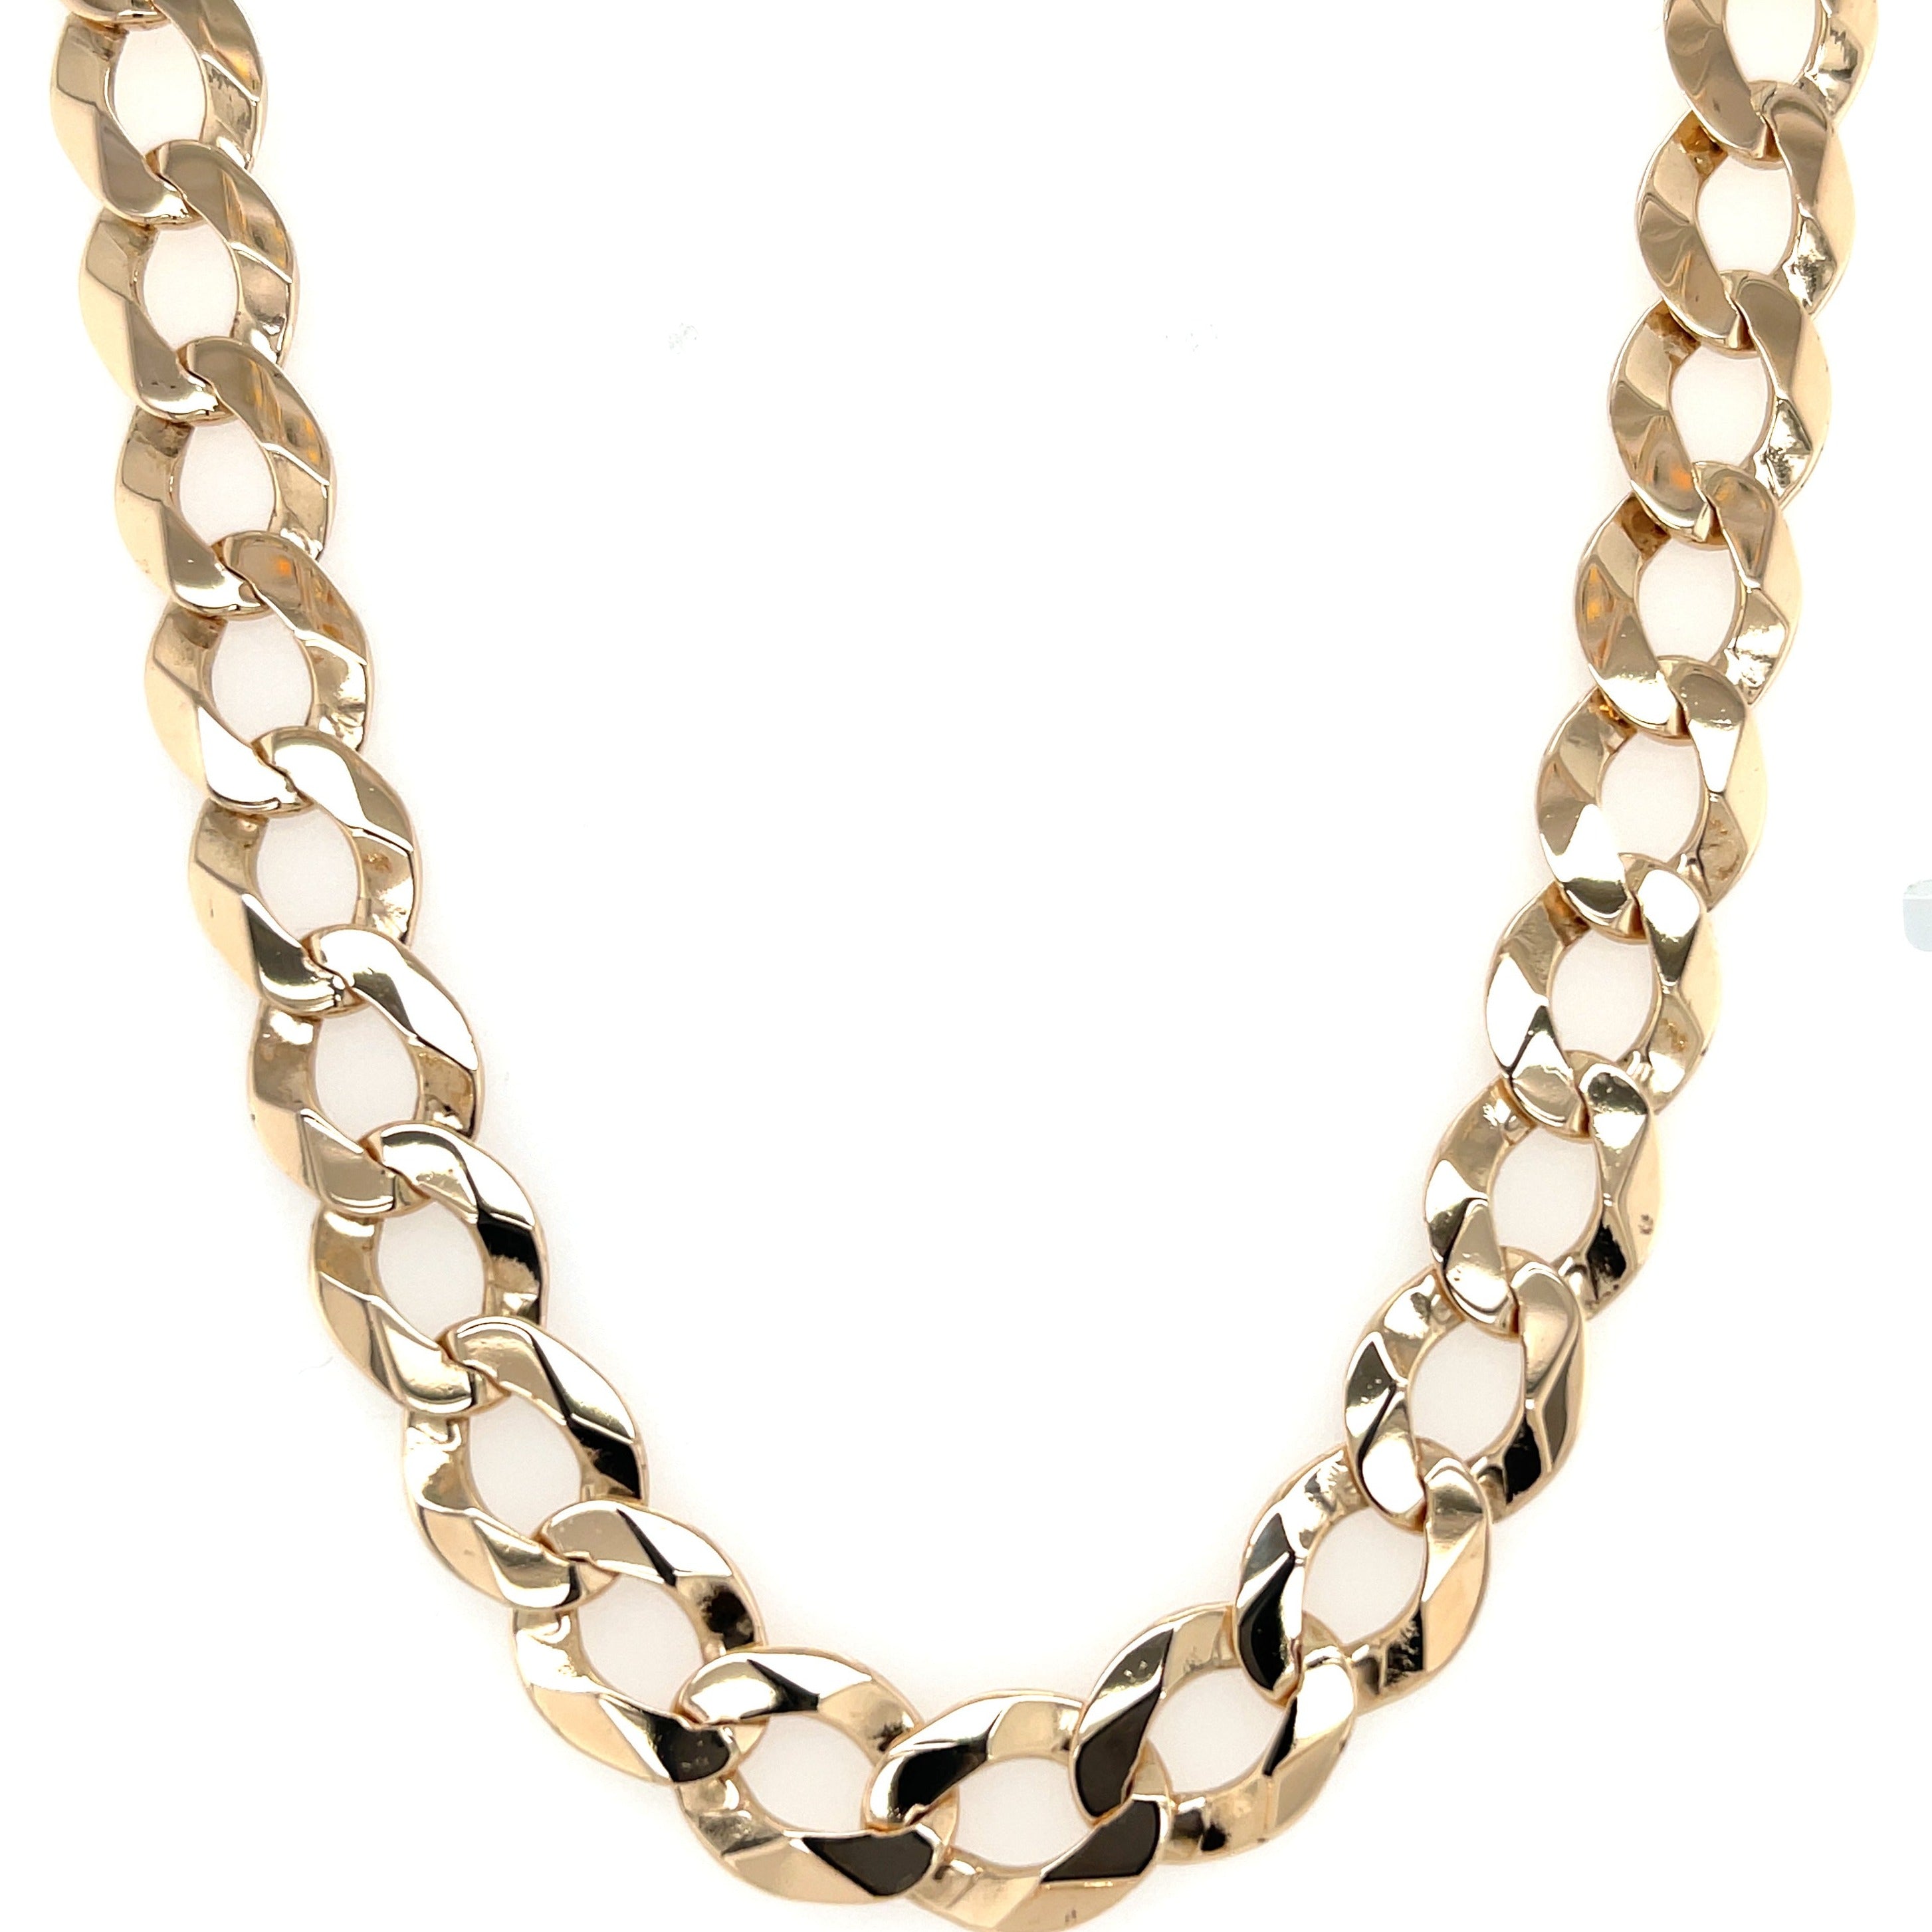 9ct Yellow Gold 22 Inch Curb Link Chain - 52.42g SOLD